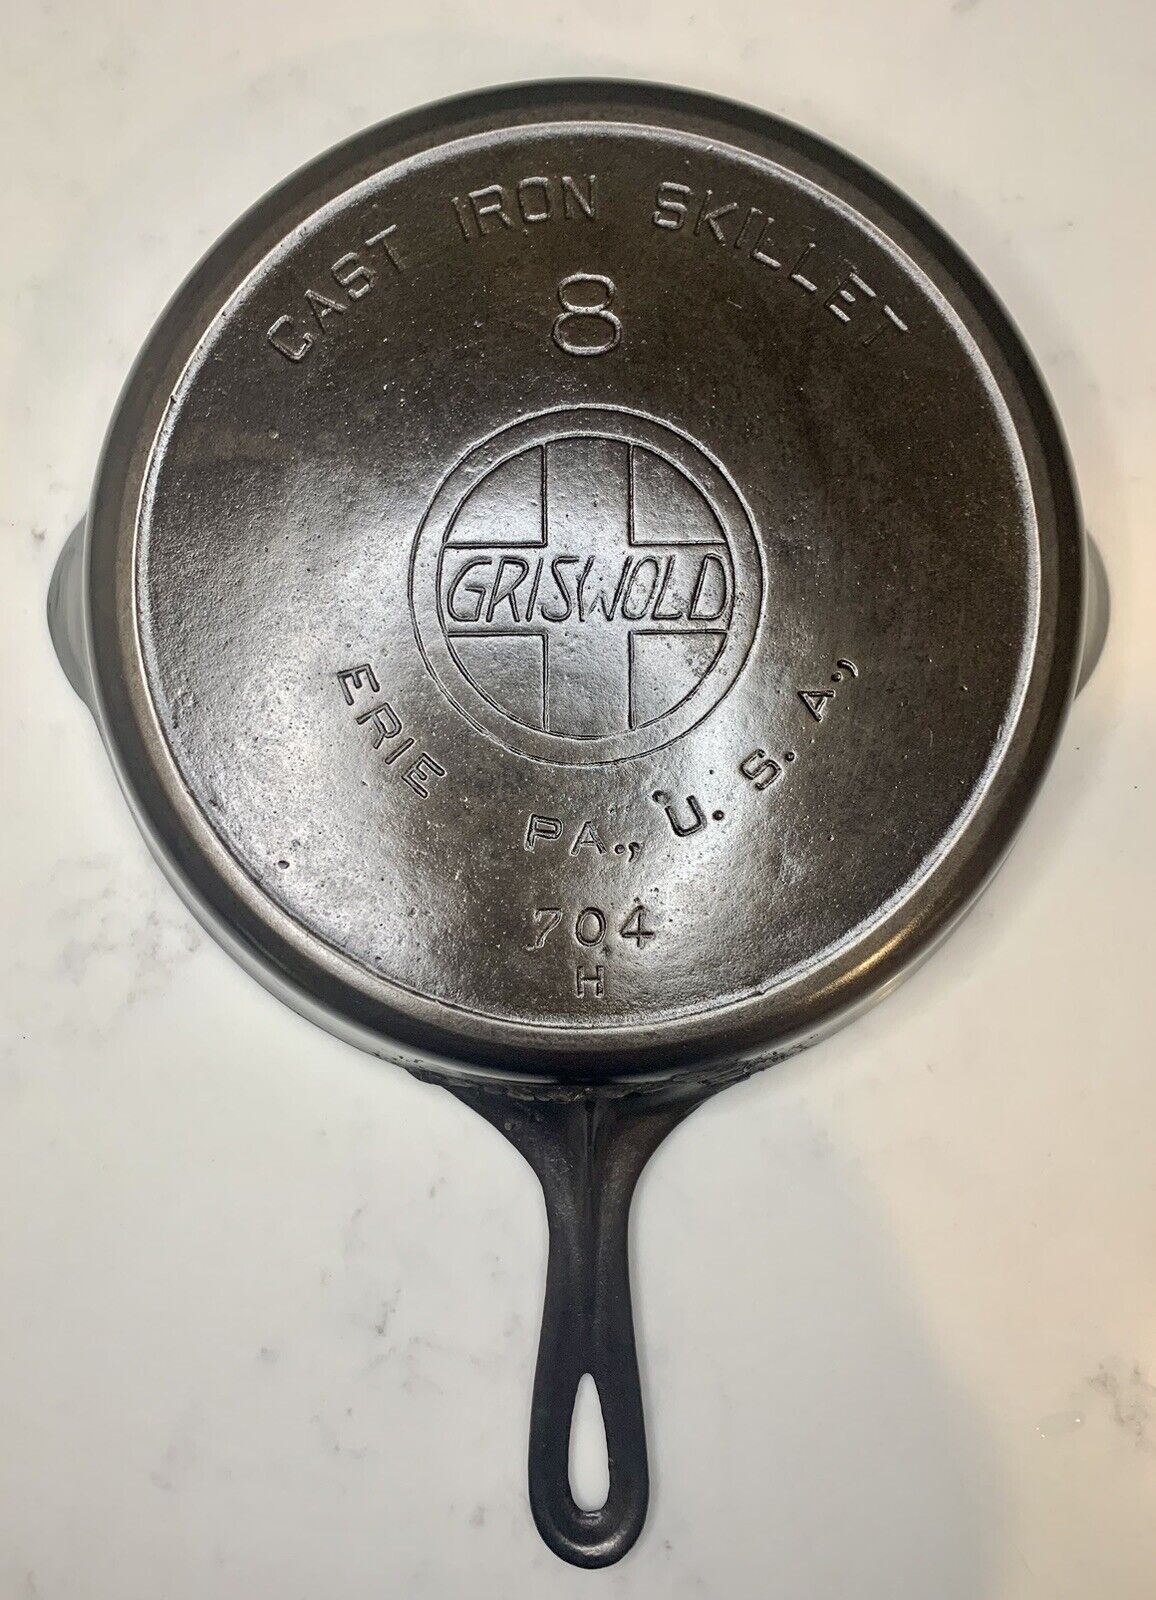 Griswold No. 8 *Repaired* Slant Logo Cast Iron Skillet 704H